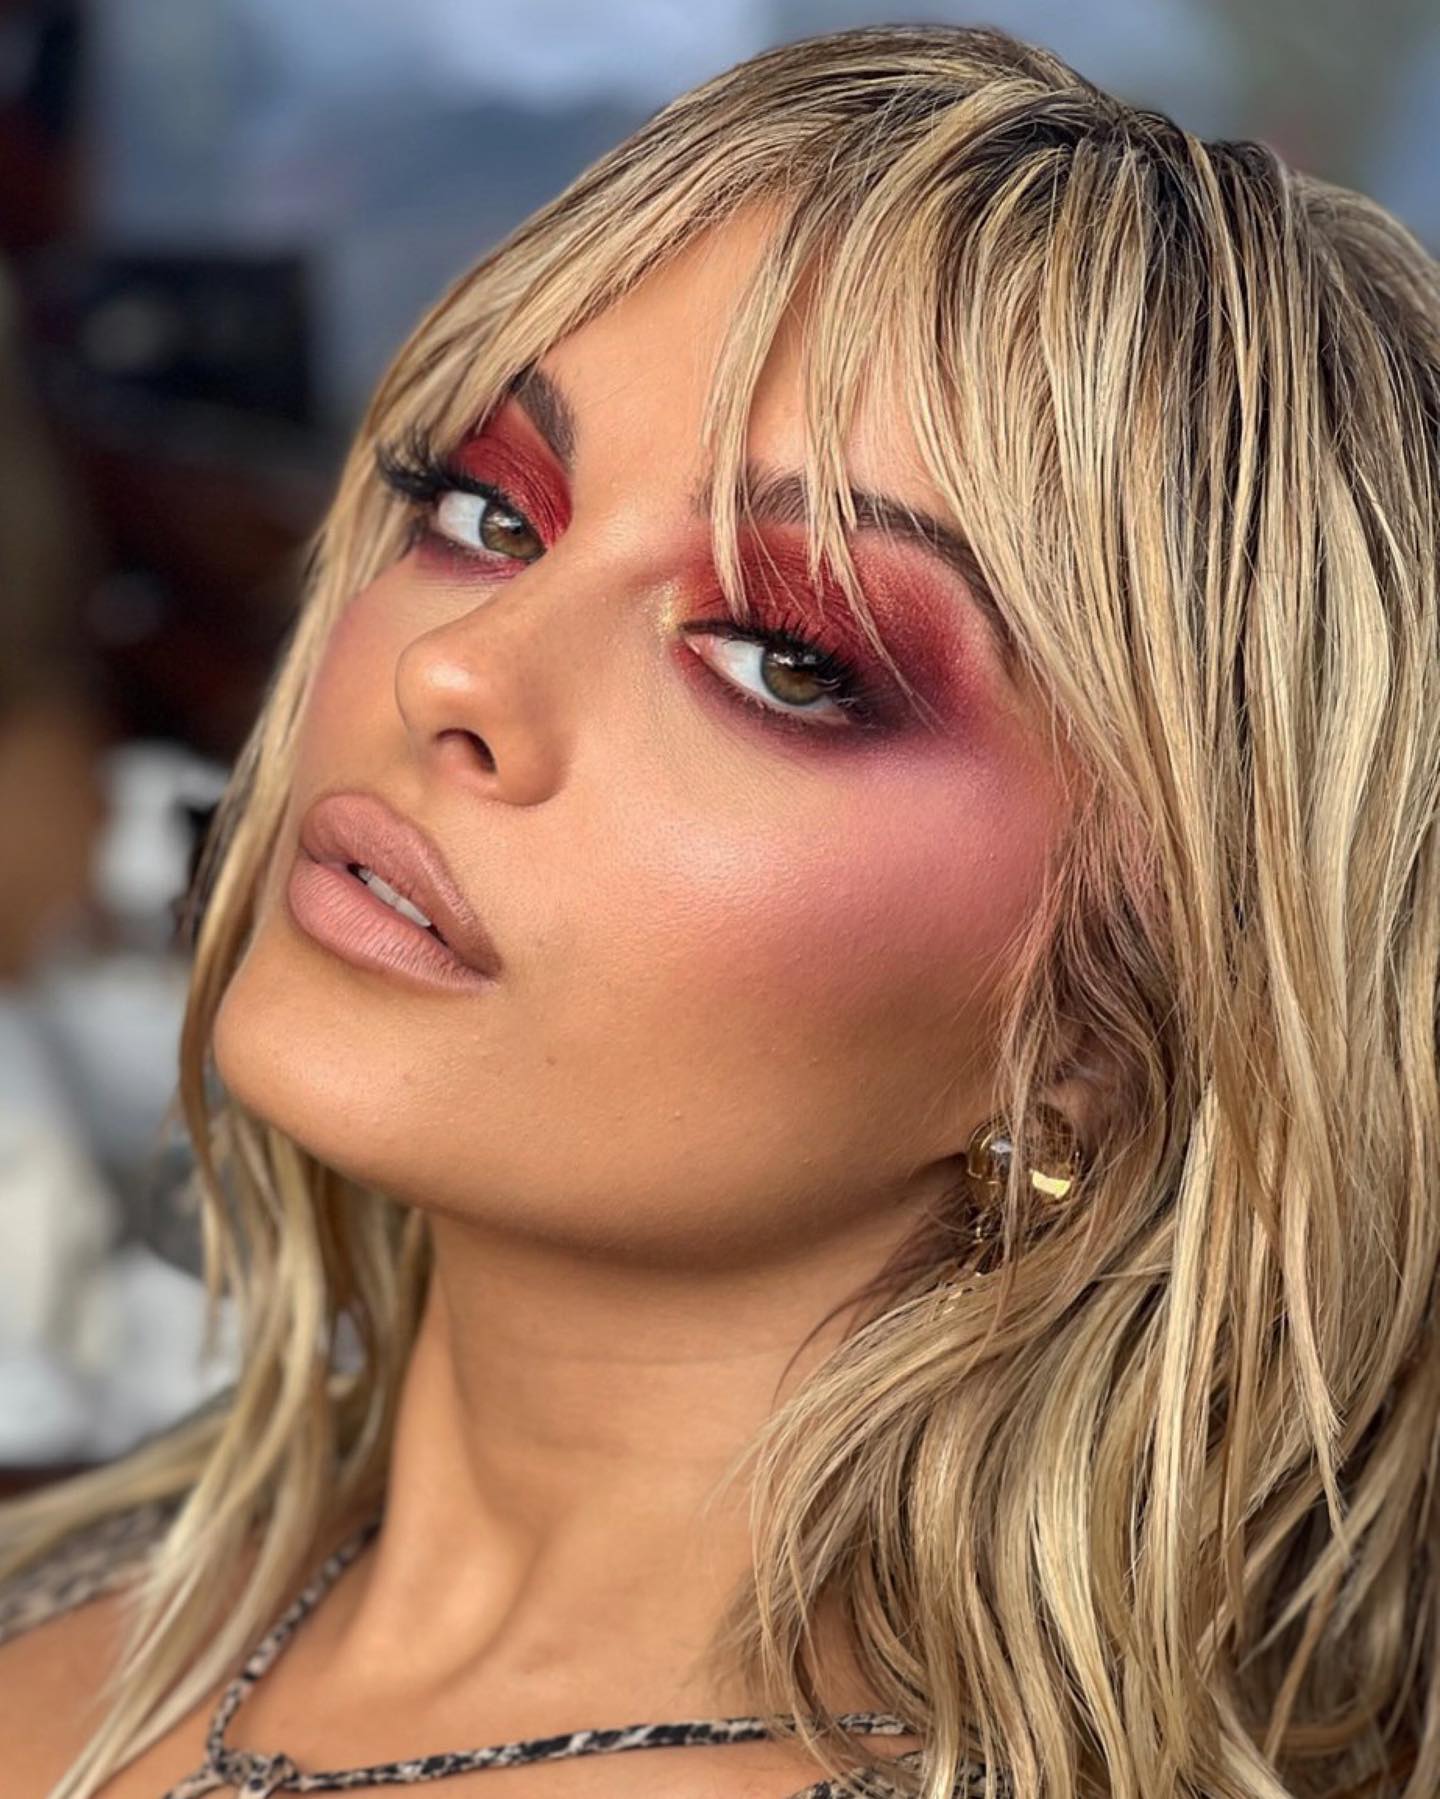 Bebe Rexha is All Wrapped Up Like a Gift! - Photo 33